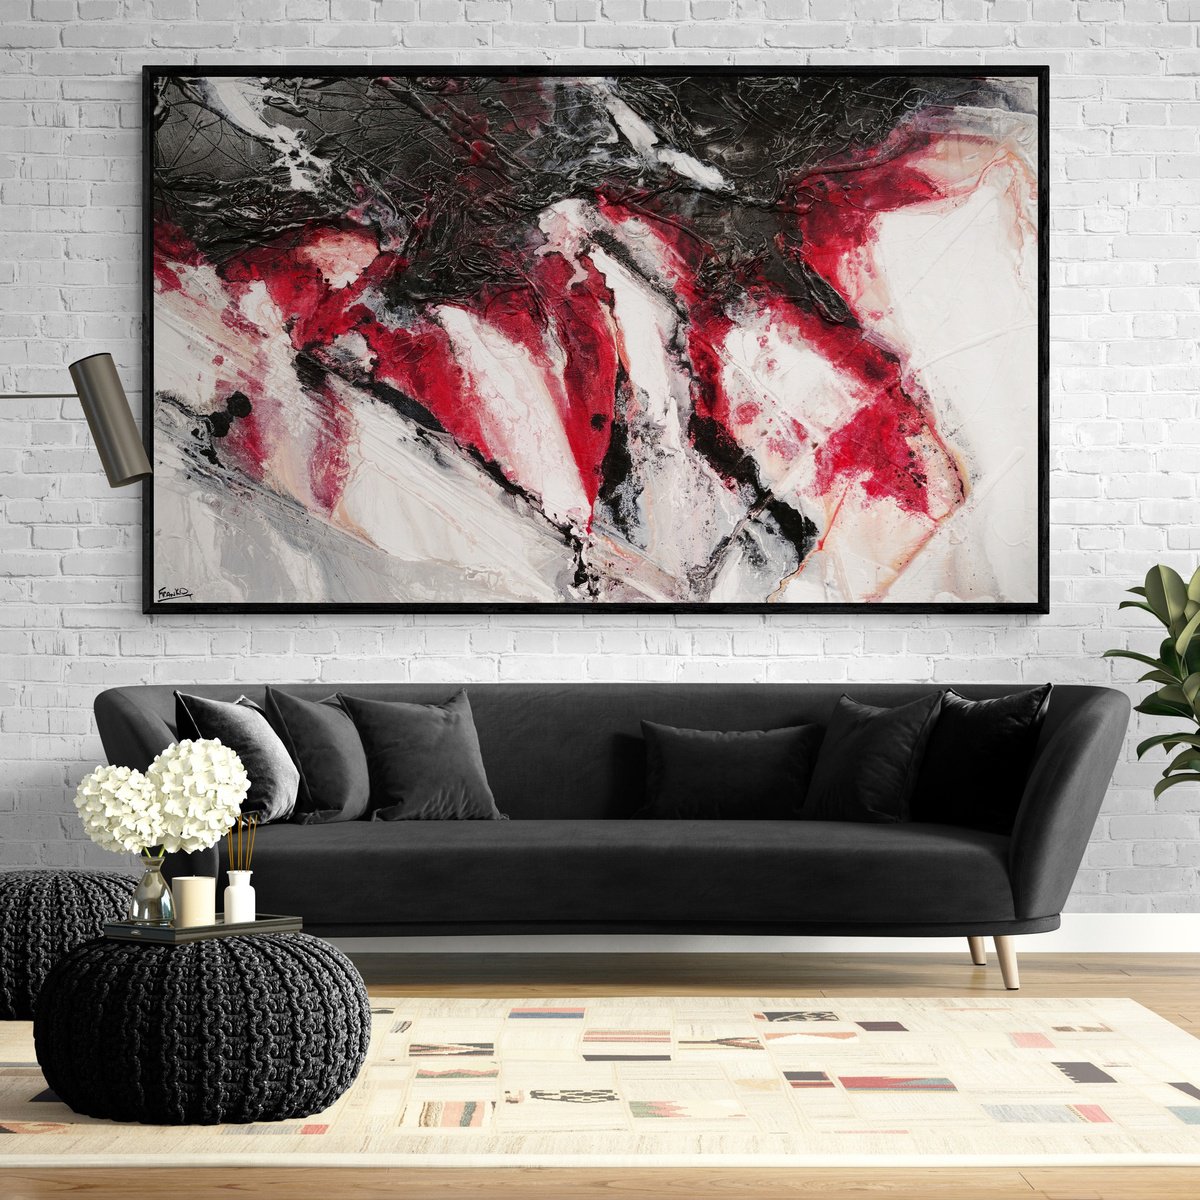 Atomic Jam 200cm x 120cm Textured Abstract Art by Franko